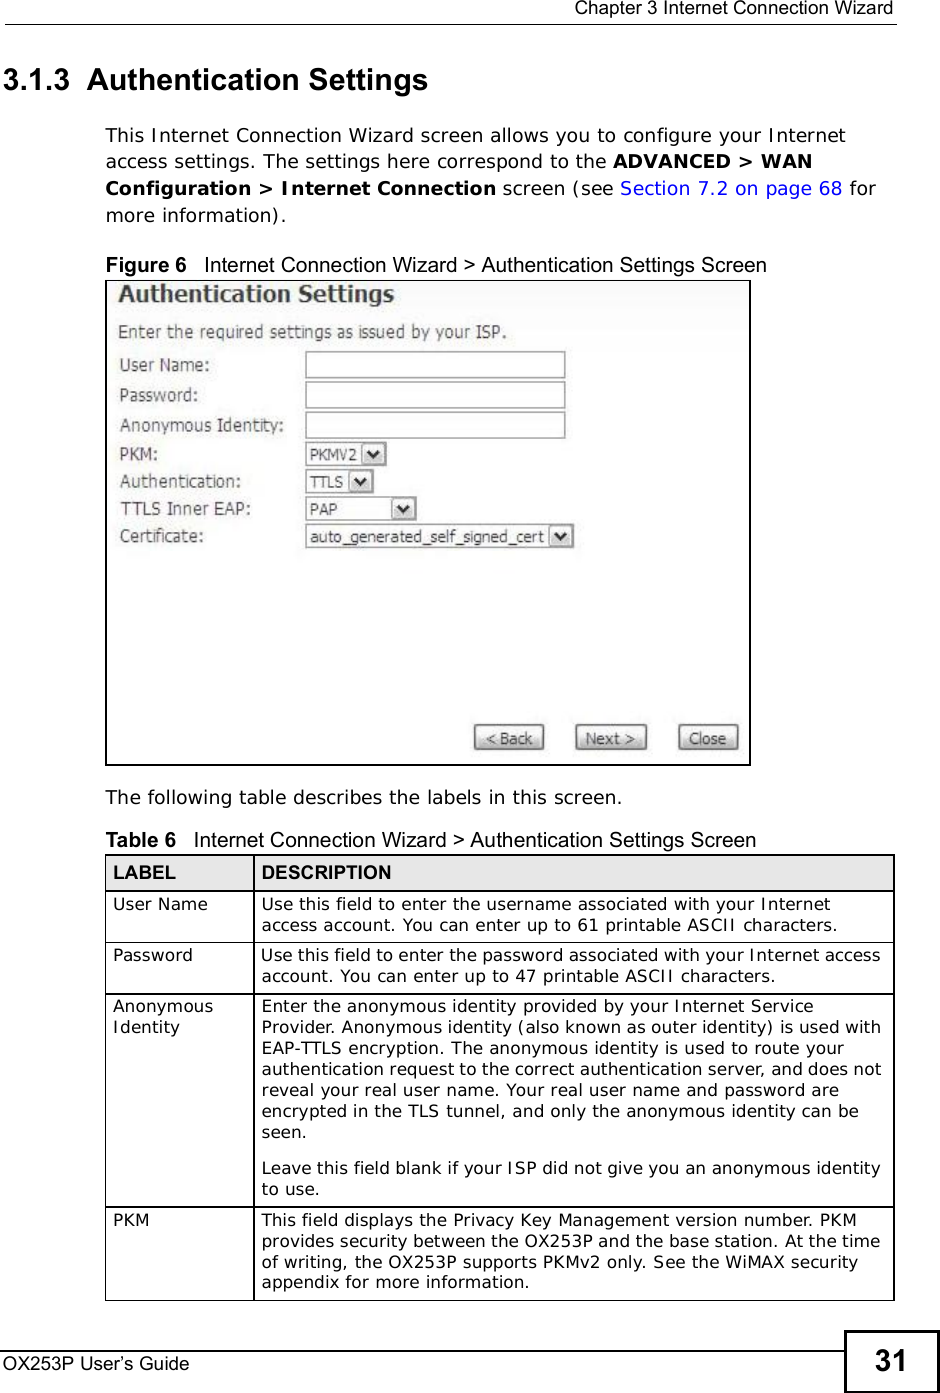  Chapter 3Internet Connection WizardOX253P User’s Guide 313.1.3  Authentication SettingsThis Internet Connection Wizard screen allows you to configure your Internet access settings. The settings here correspond to the ADVANCED &gt; WAN Configuration &gt; Internet Connection screen (see Section 7.2 on page 68 for more information).Figure 6   Internet Connection Wizard &gt; Authentication Settings ScreenThe following table describes the labels in this screen.Table 6   Internet Connection Wizard &gt; Authentication Settings ScreenLABEL DESCRIPTIONUser NameUse this field to enter the username associated with your Internet access account. You can enter up to 61 printable ASCII characters.PasswordUse this field to enter the password associated with your Internet access account. You can enter up to 47 printable ASCII characters.Anonymous Identity Enter the anonymous identity provided by your Internet Service Provider. Anonymous identity (also known as outer identity) is used with EAP-TTLS encryption. The anonymous identity is used to route your authentication request to the correct authentication server, and does not reveal your real user name. Your real user name and password are encrypted in the TLS tunnel, and only the anonymous identity can be seen.Leave this field blank if your ISP did not give you an anonymous identity to use.PKMThis field displays the Privacy Key Management version number. PKM provides security between the OX253P and the base station. At the time of writing, the OX253P supports PKMv2 only. See the WiMAX security appendix for more information.